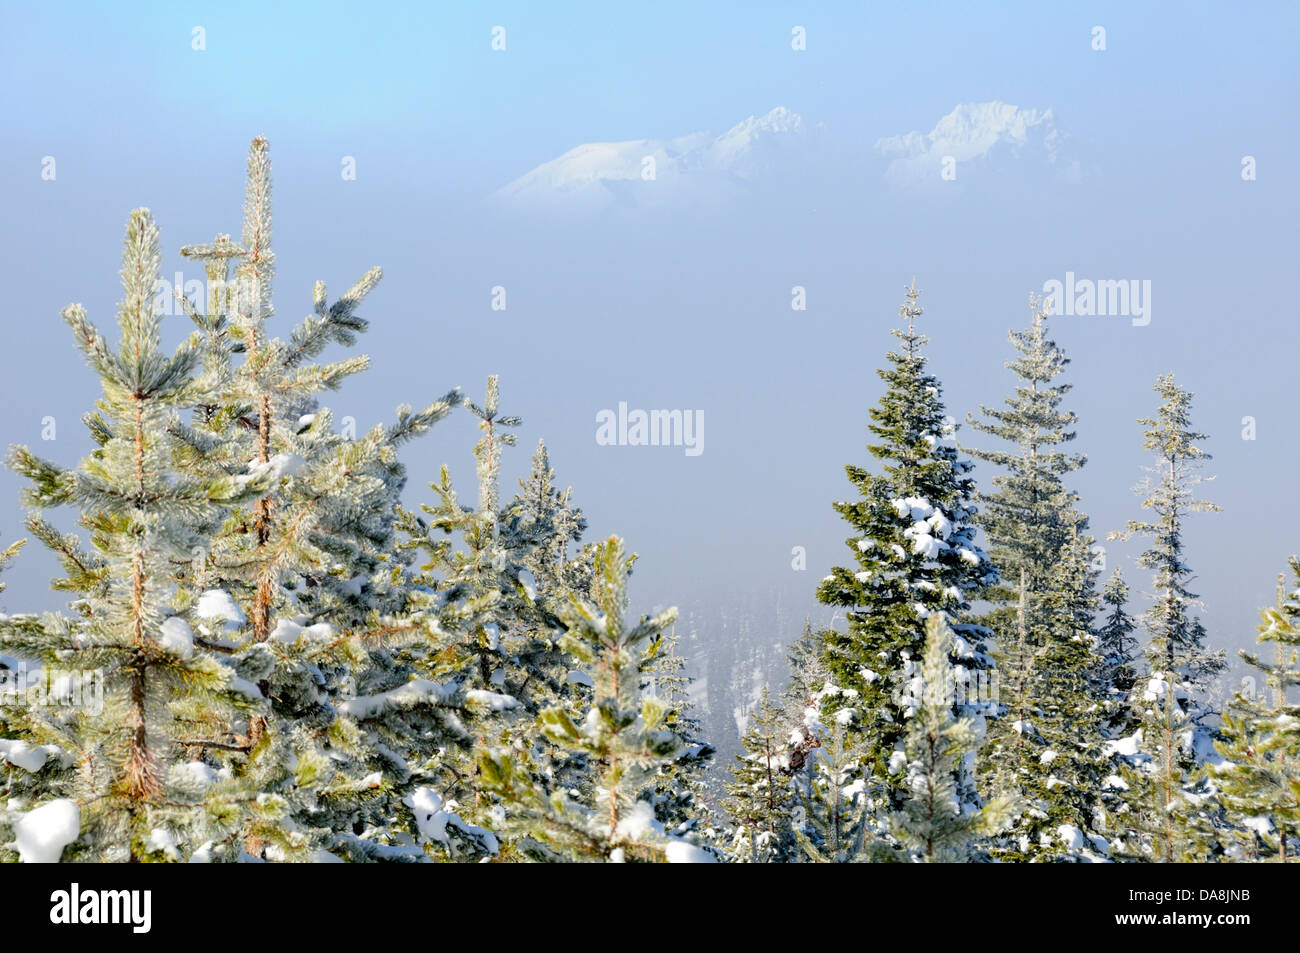 USA, United States, America, Oregon, Bend, North America, Deschutes, County, Cascades mountains, National Forest, winter, nature Stock Photo